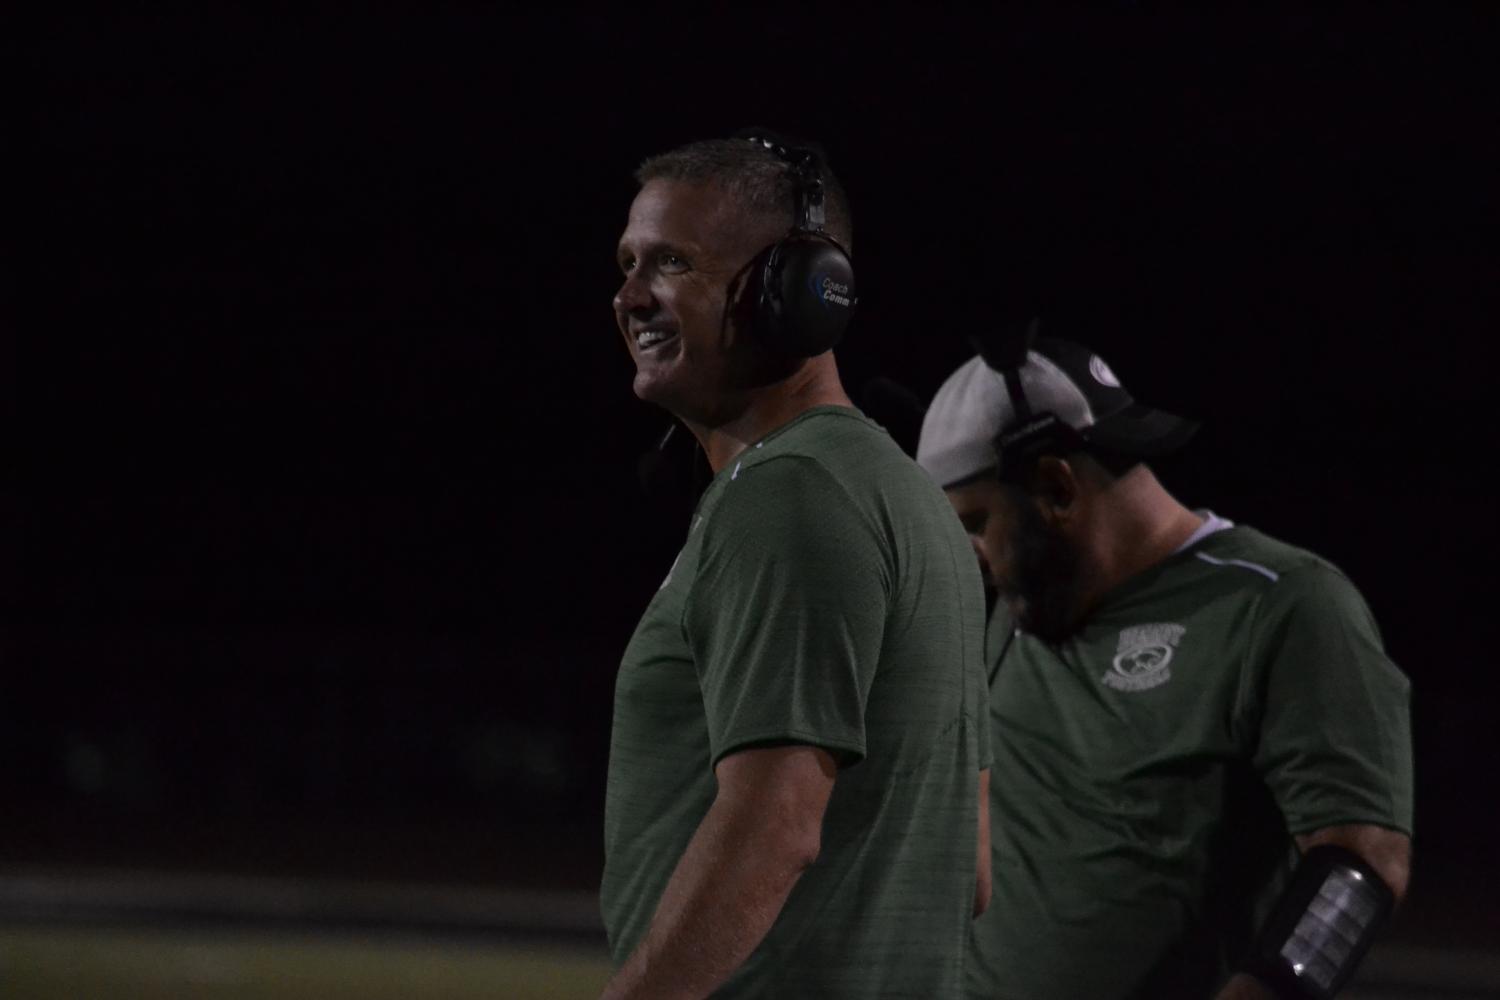 Coaches+of+Derby+football+photo+gallery+%28Photos+by+Kaitlyn+Sanders%29